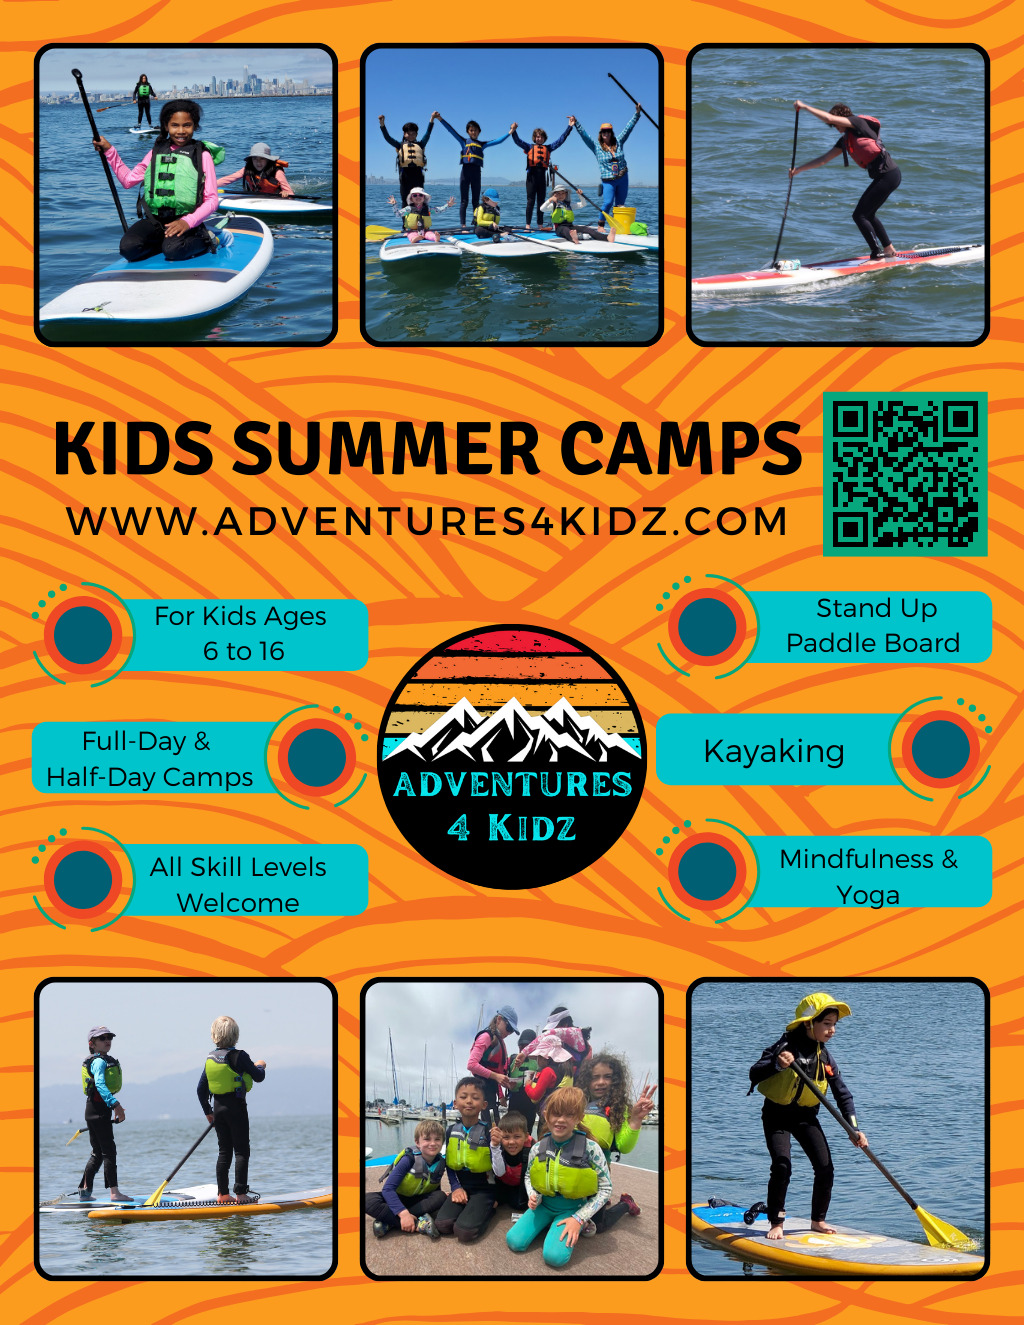  KIDS SUMMER CAMPS  A Fun and Exciting Way to Keep Your Kids Active this Summer  promotion flier on Digifli com